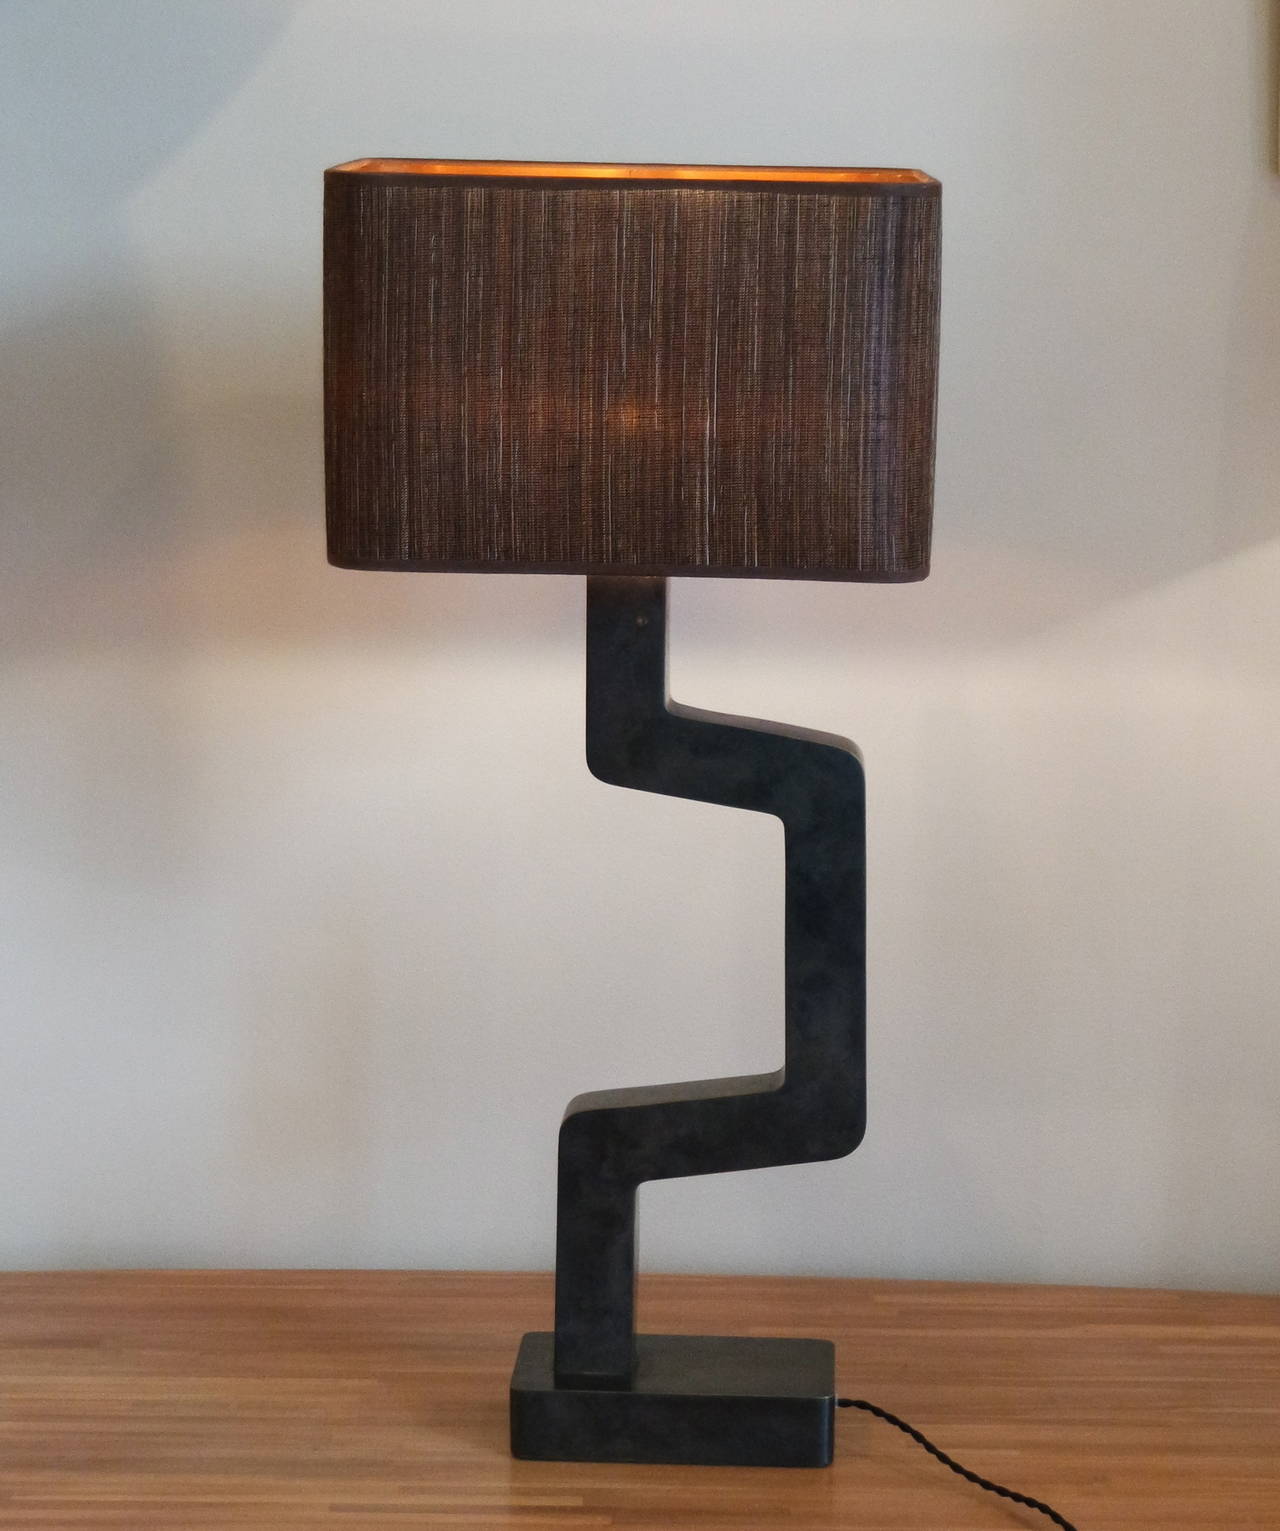 Limited edition of the Alpha lamp by Philippe Cuny, realization in bronze.